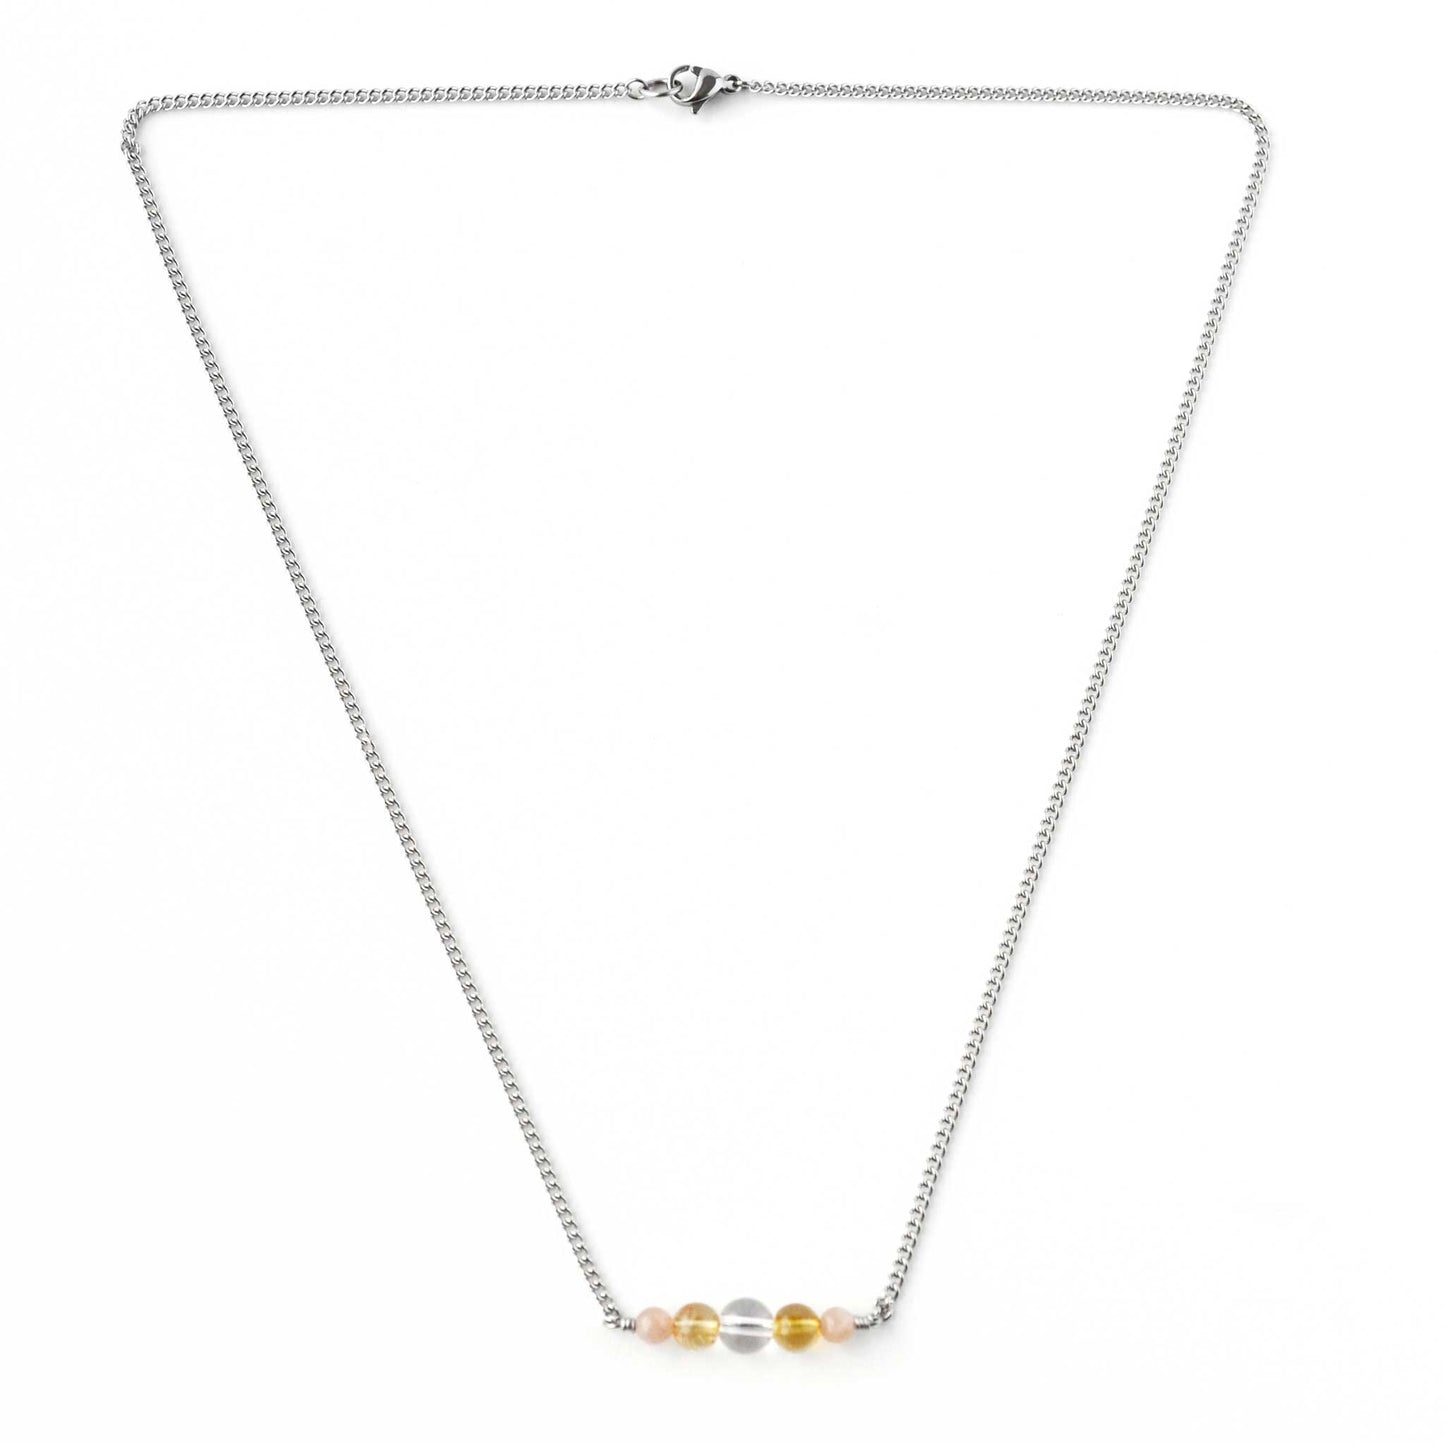 Flatlay dainty yellow gemstone necklace with stainless steel chain and lobster clasp